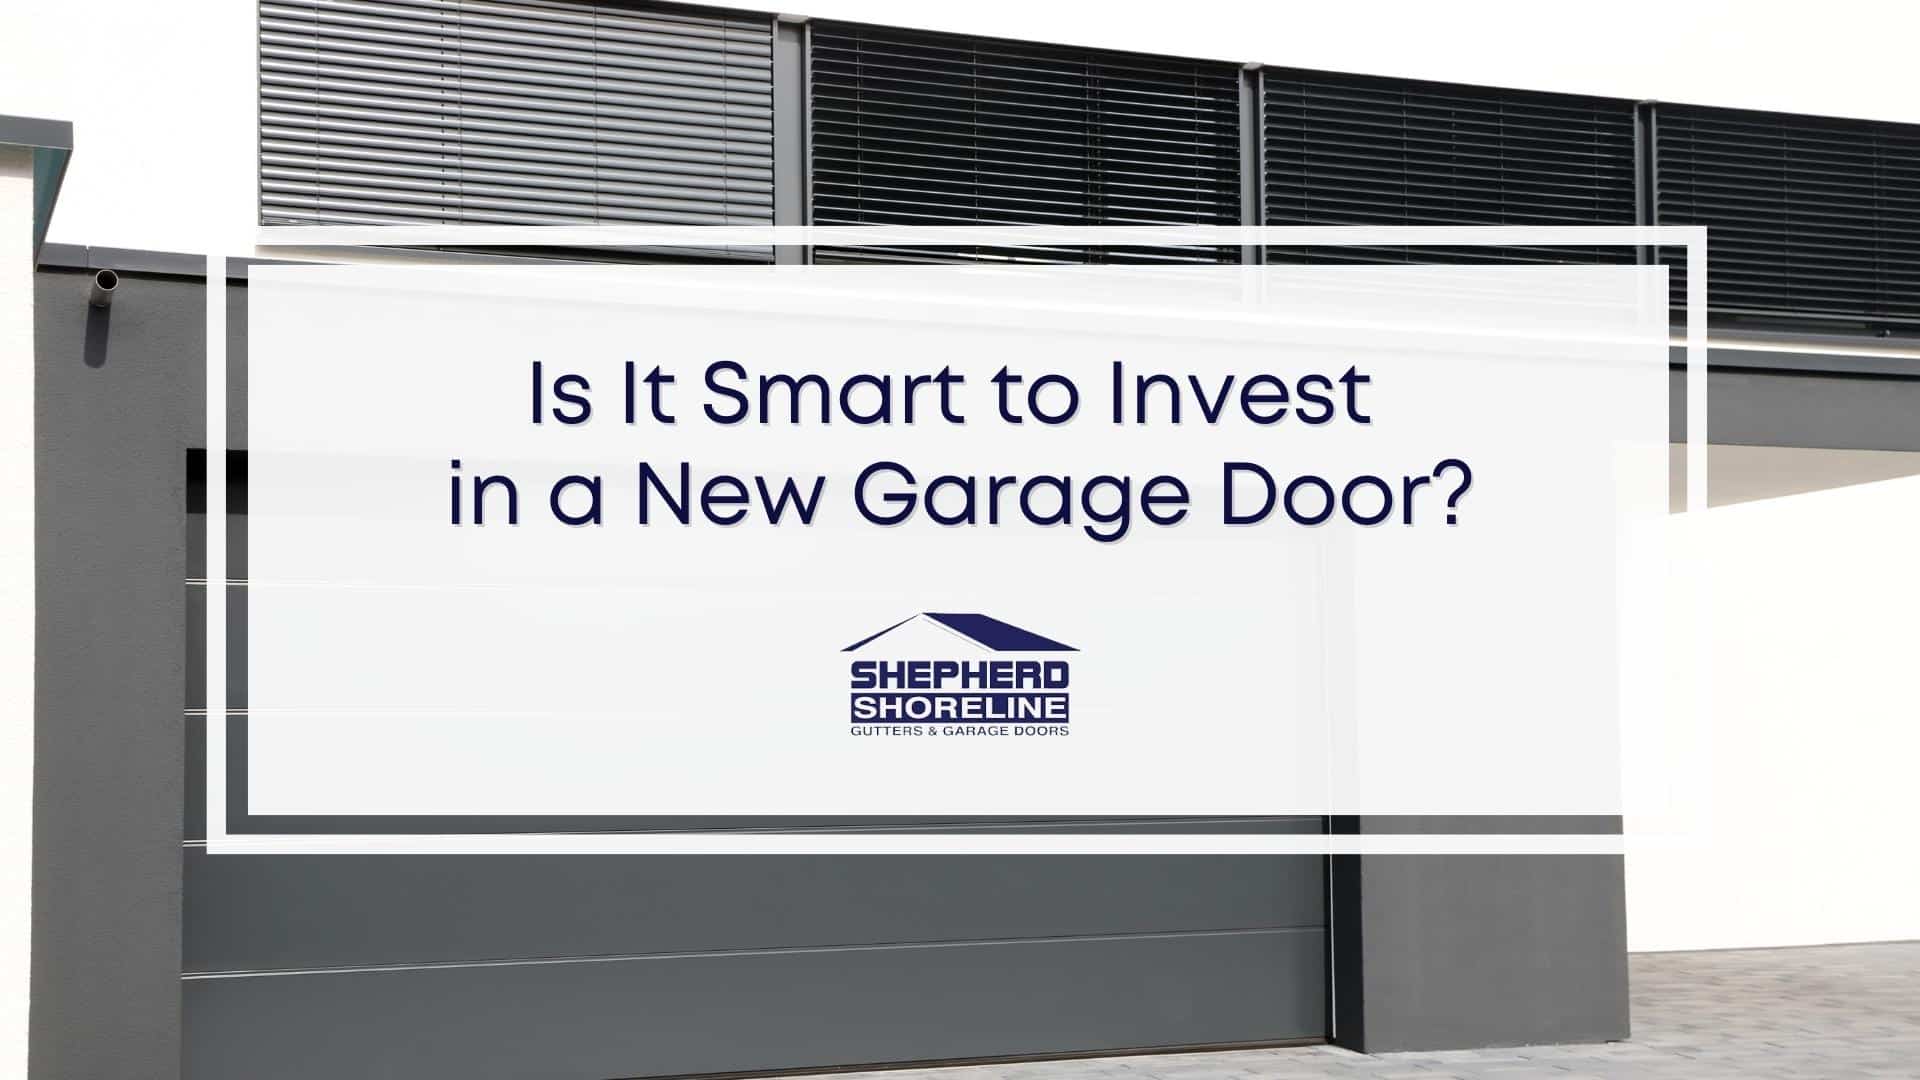 Featured image of is it smart to invest in a new garage door?